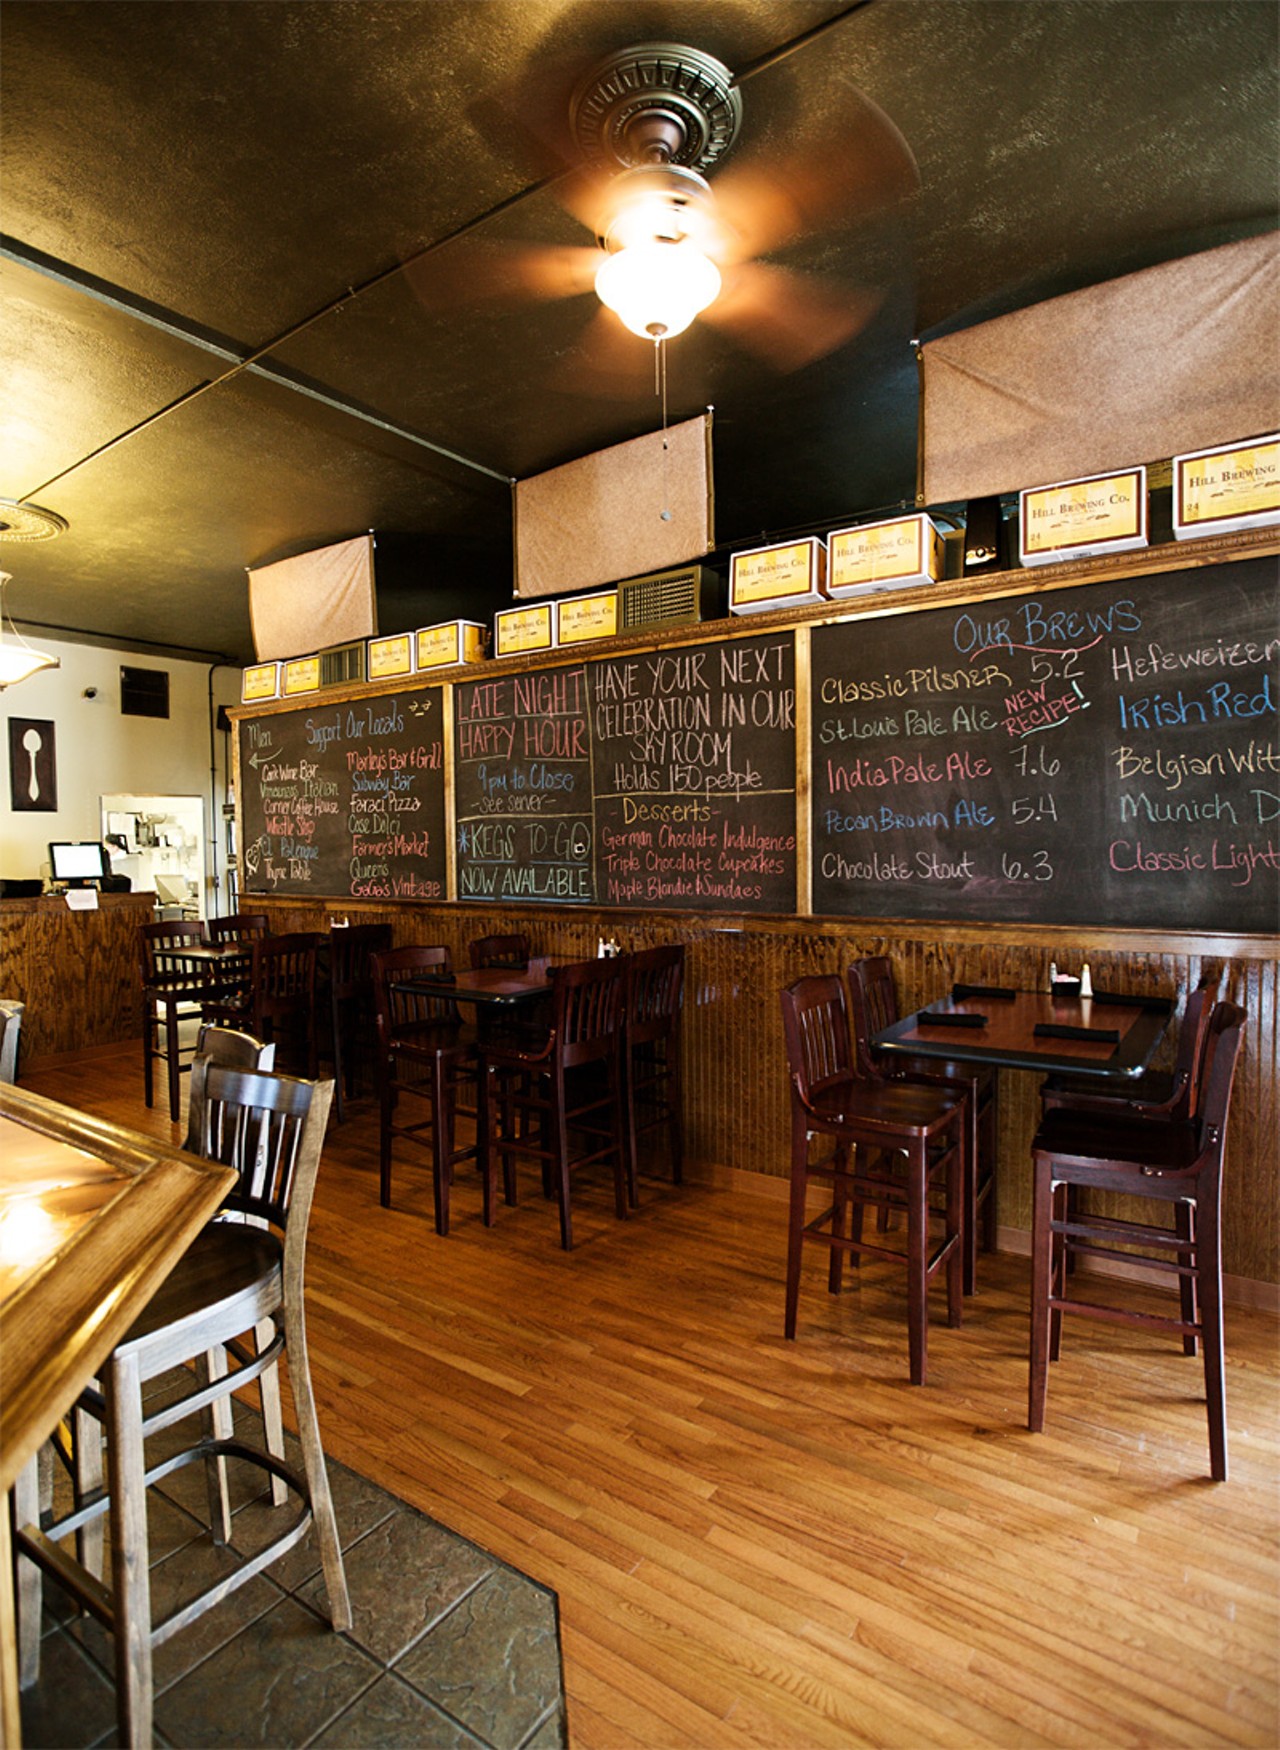 The interior of Hill Brewing Company is relaxed and inviting.